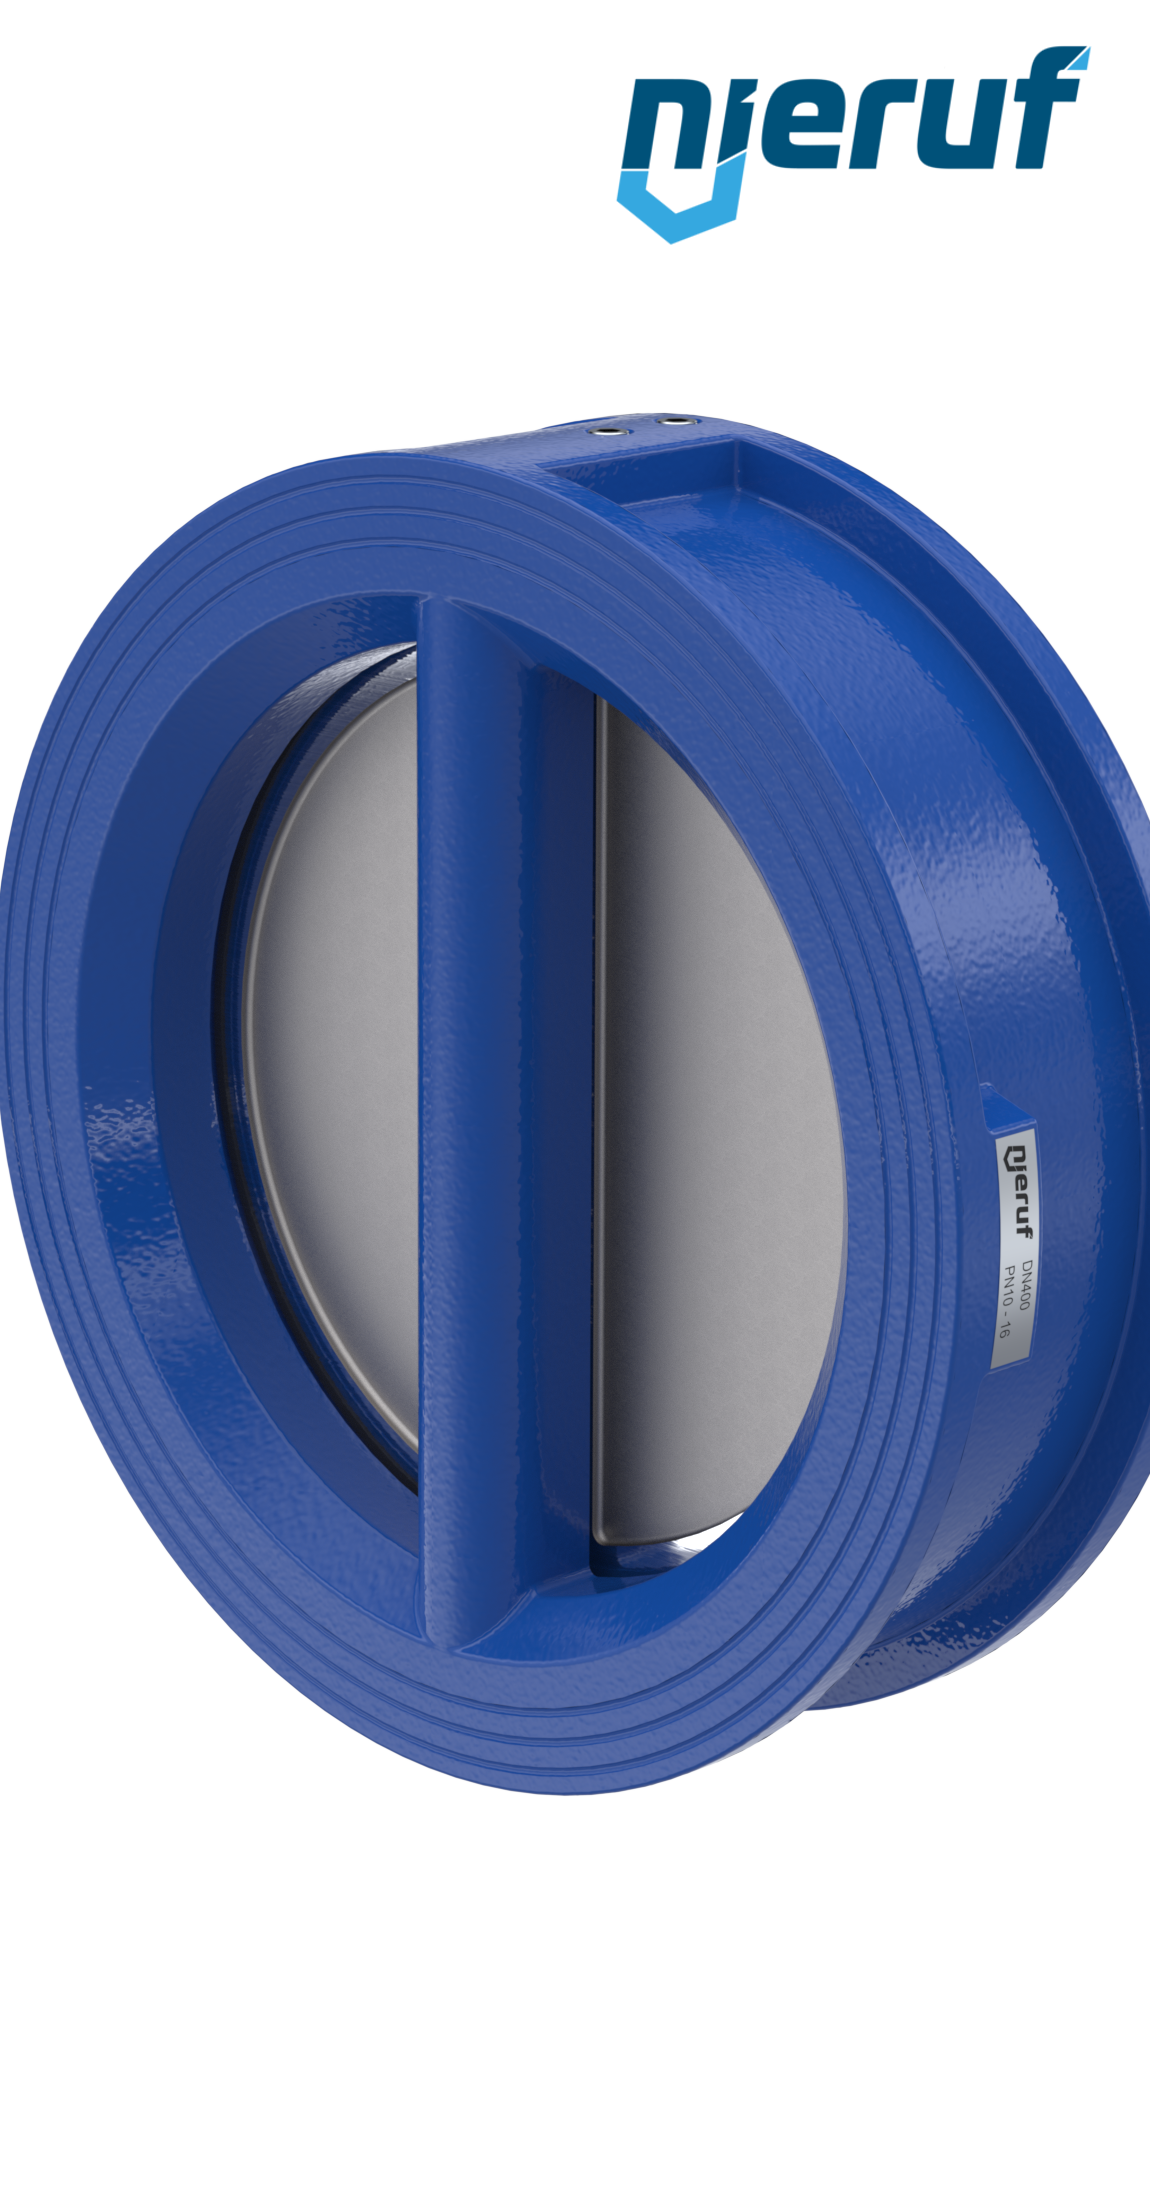 dual plate check valve DN400 DR02 ANSI 150 GGG40 epoxyd plated blue 180µm FKM